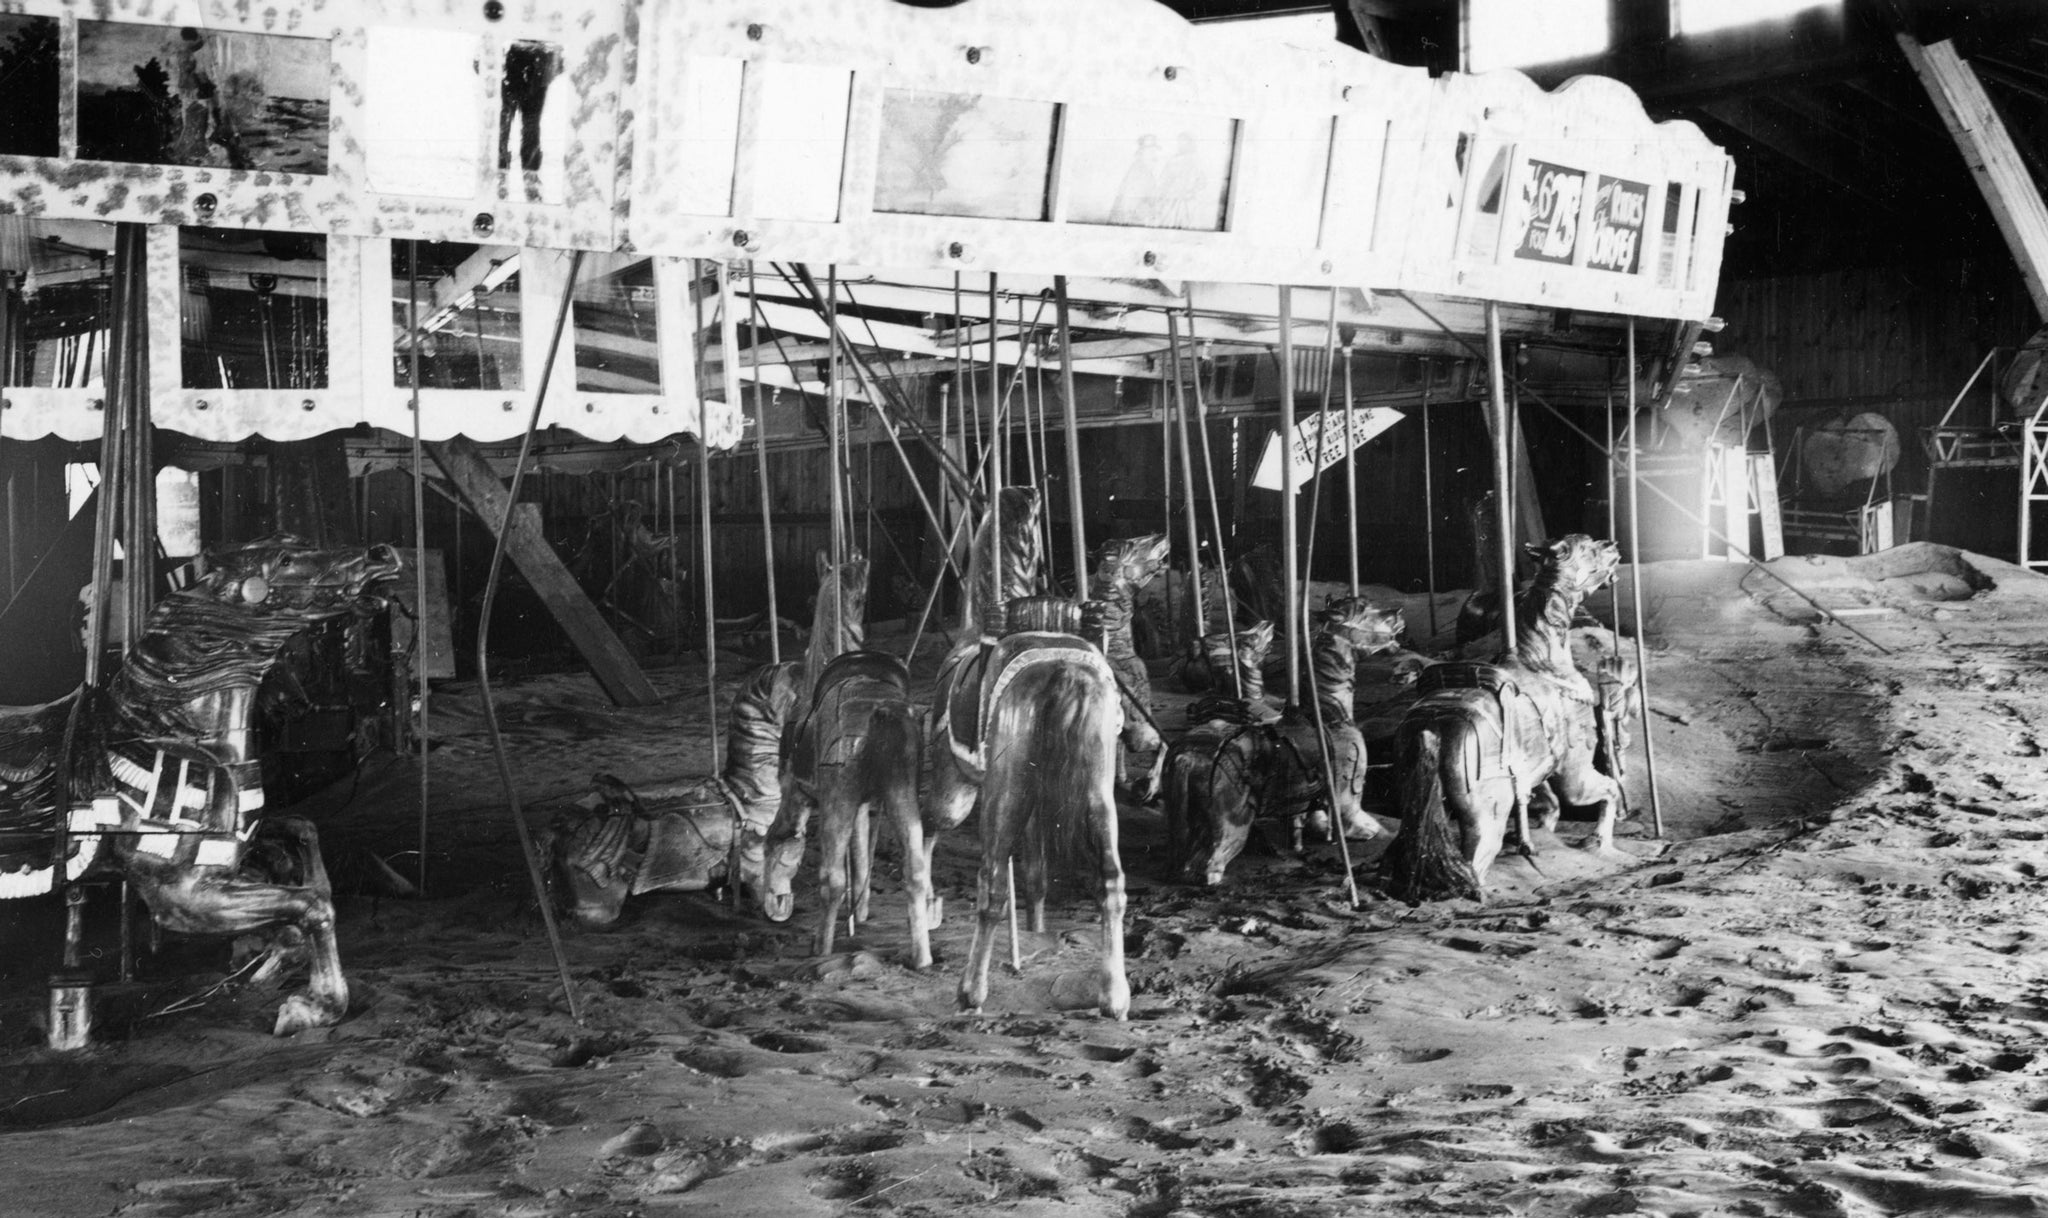 Merrimack Park carousel in the aftermath of the Great Flood of 1936. The amusement park operated along the Merrimack River between 1921 and 1936. -- Methuen Historical Commission